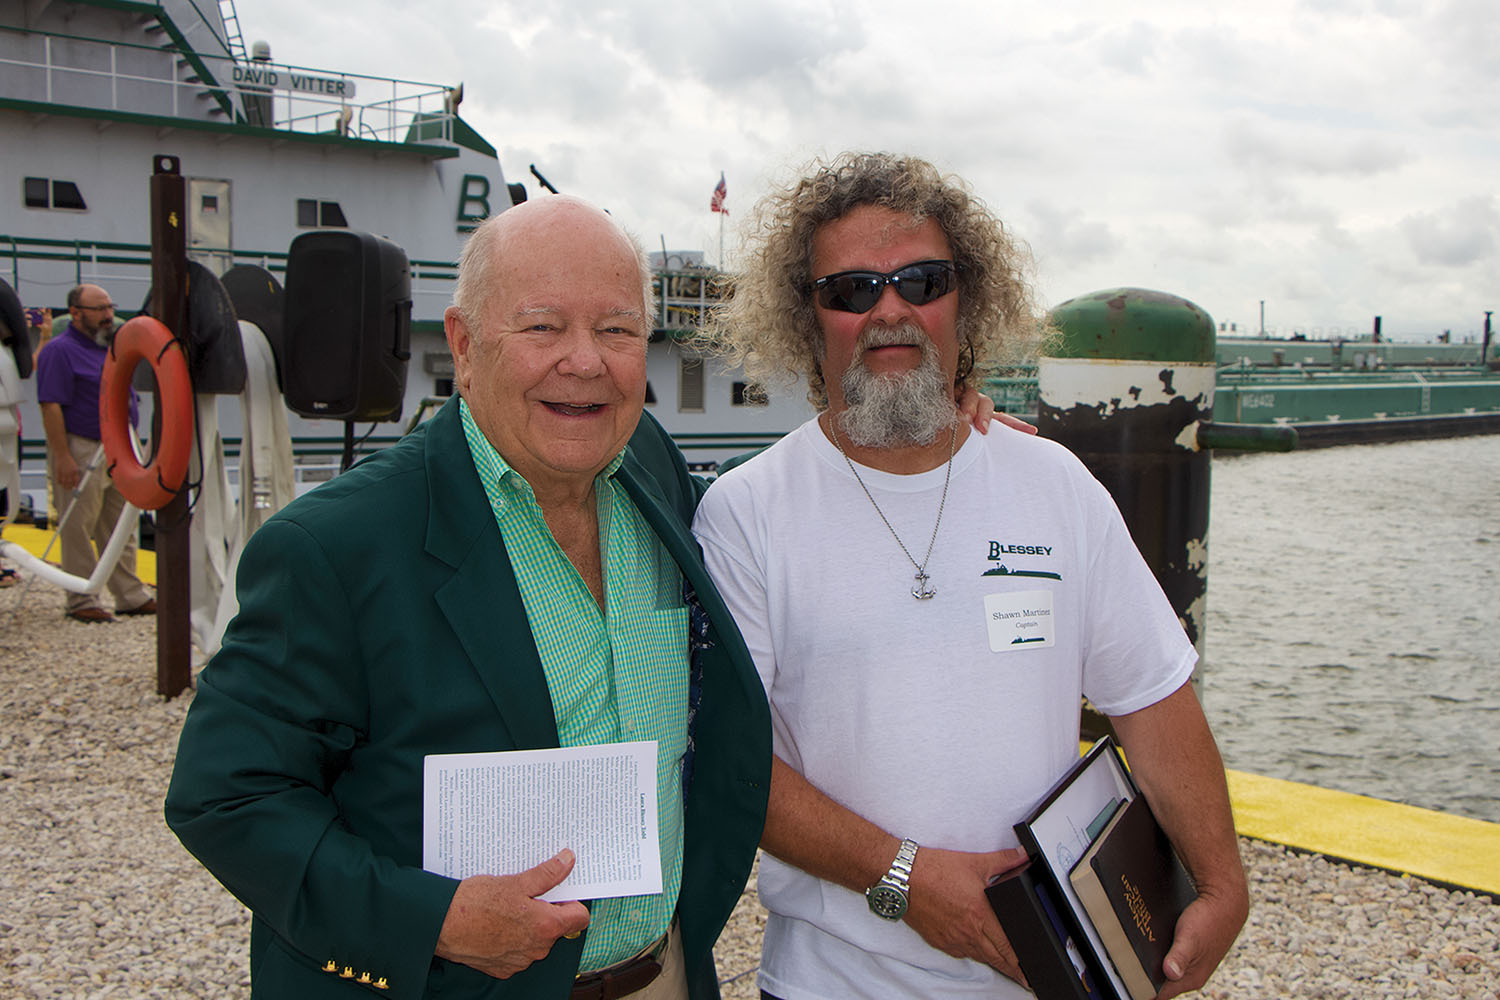 Walter Blessey with Capt. Shawn Martinez. (Photo by Nelson Spencer Jr.)